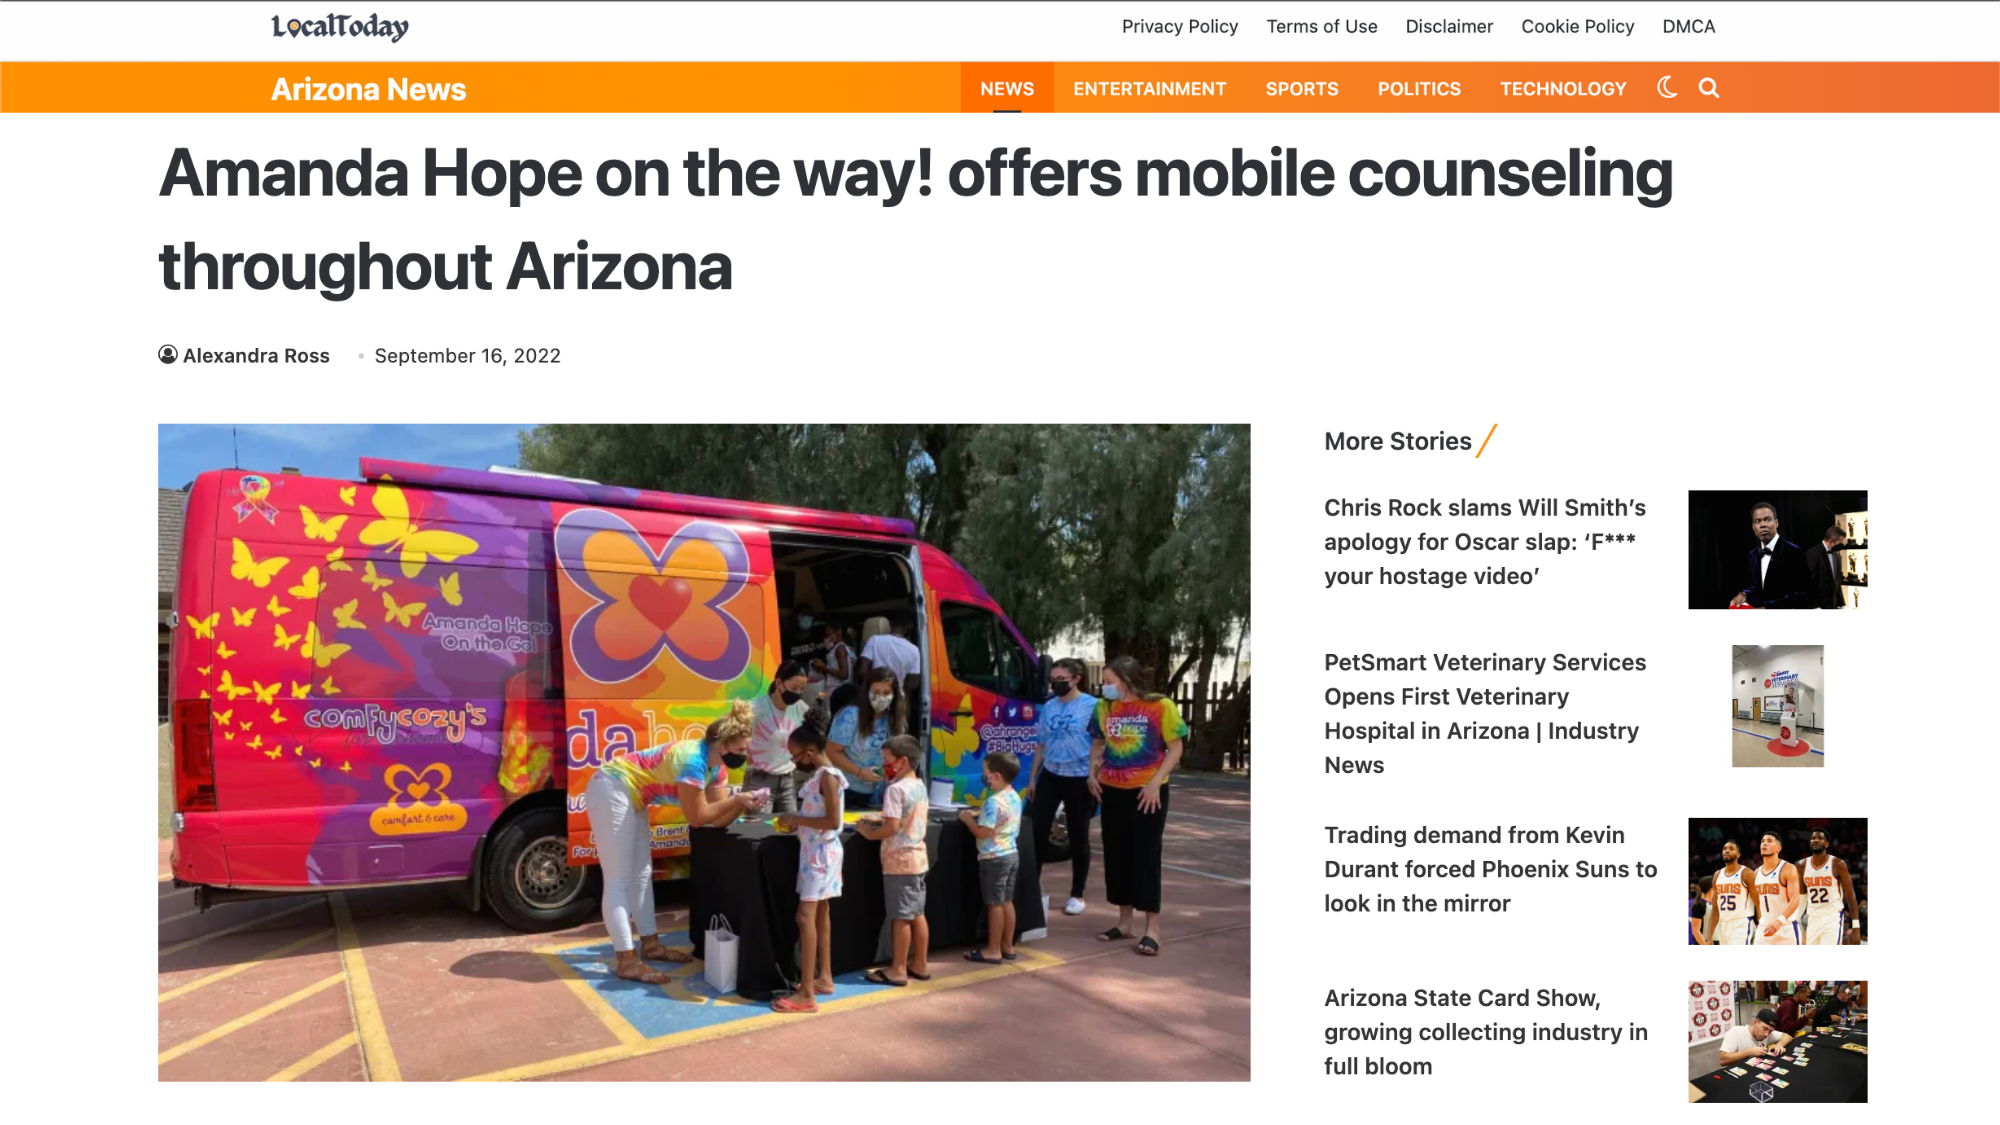 Local Today: Amanda Hope on the way! offers mobile counseling throughout Arizona (Copy)